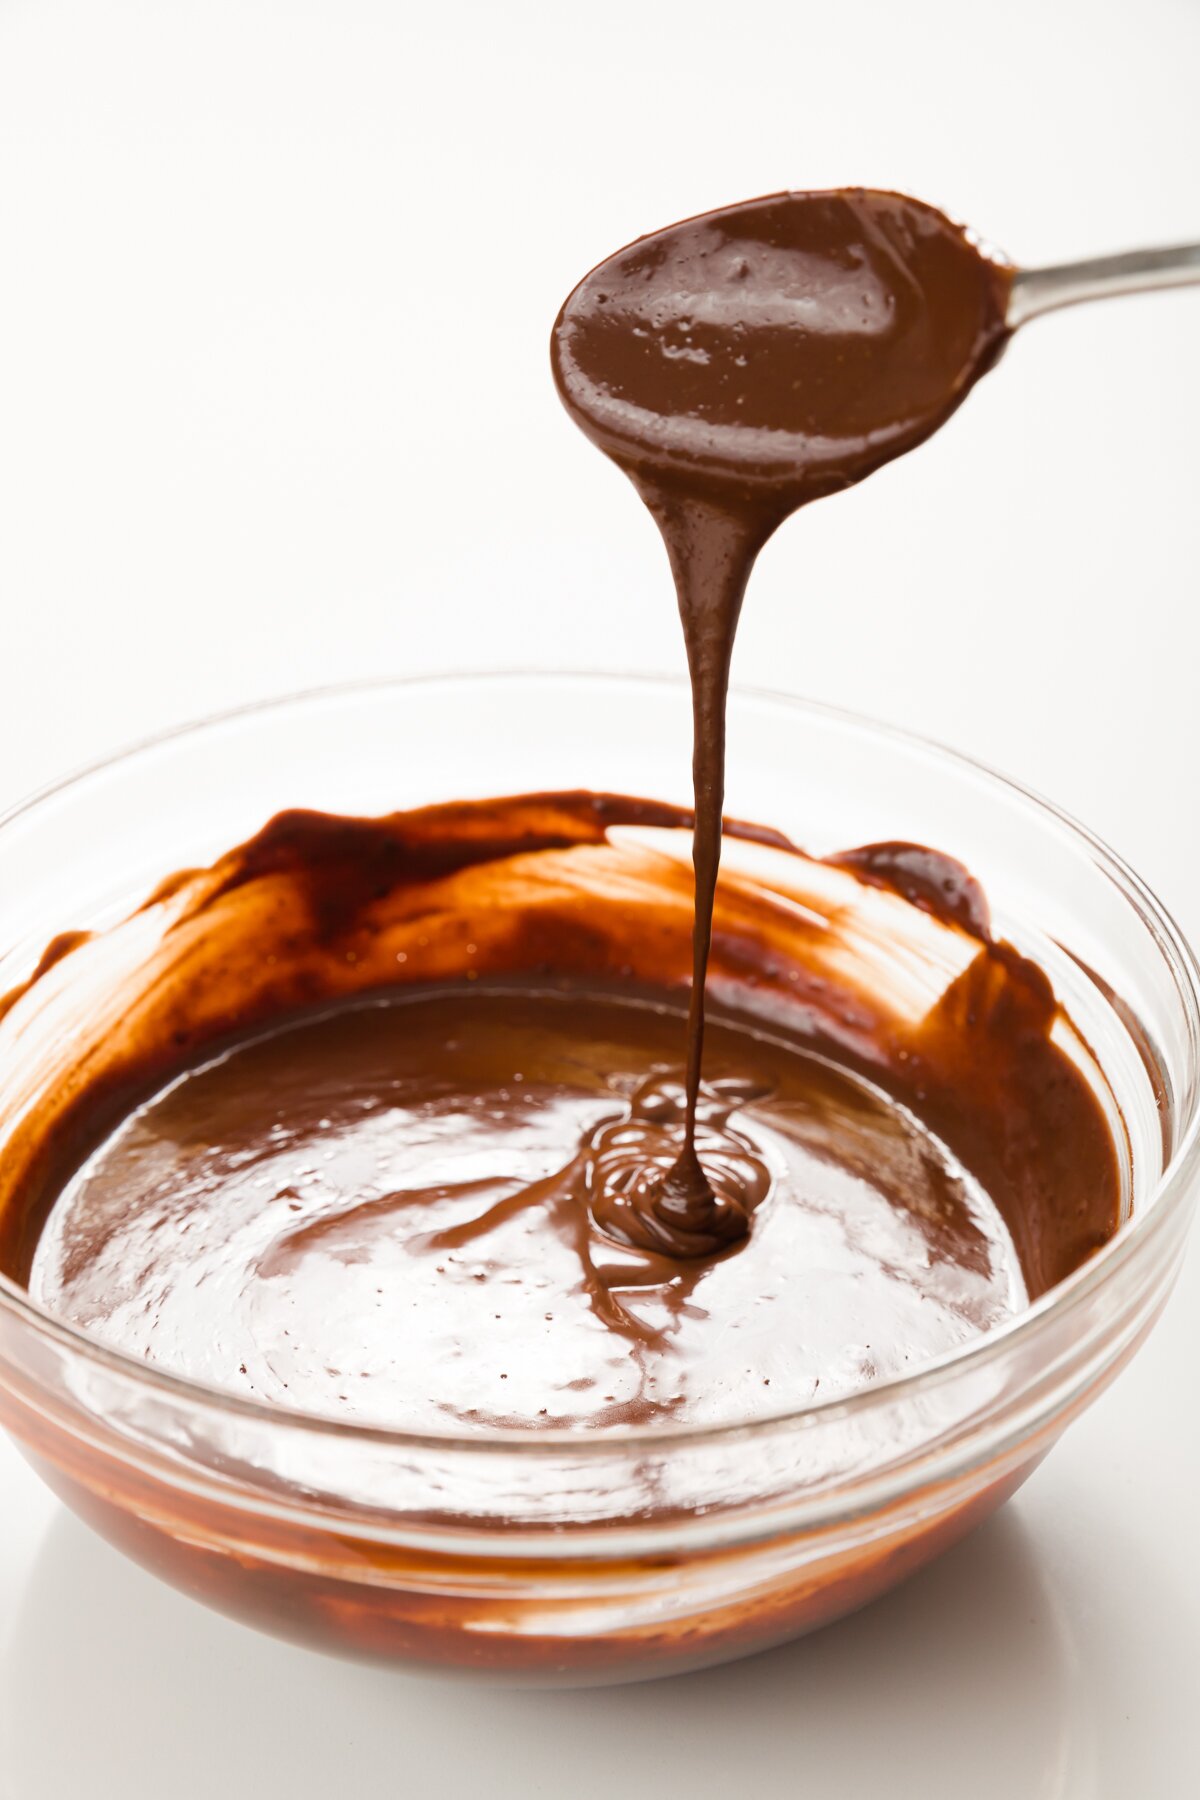 Mexican chocolate sauce dripping off a spoon into a glass bowl